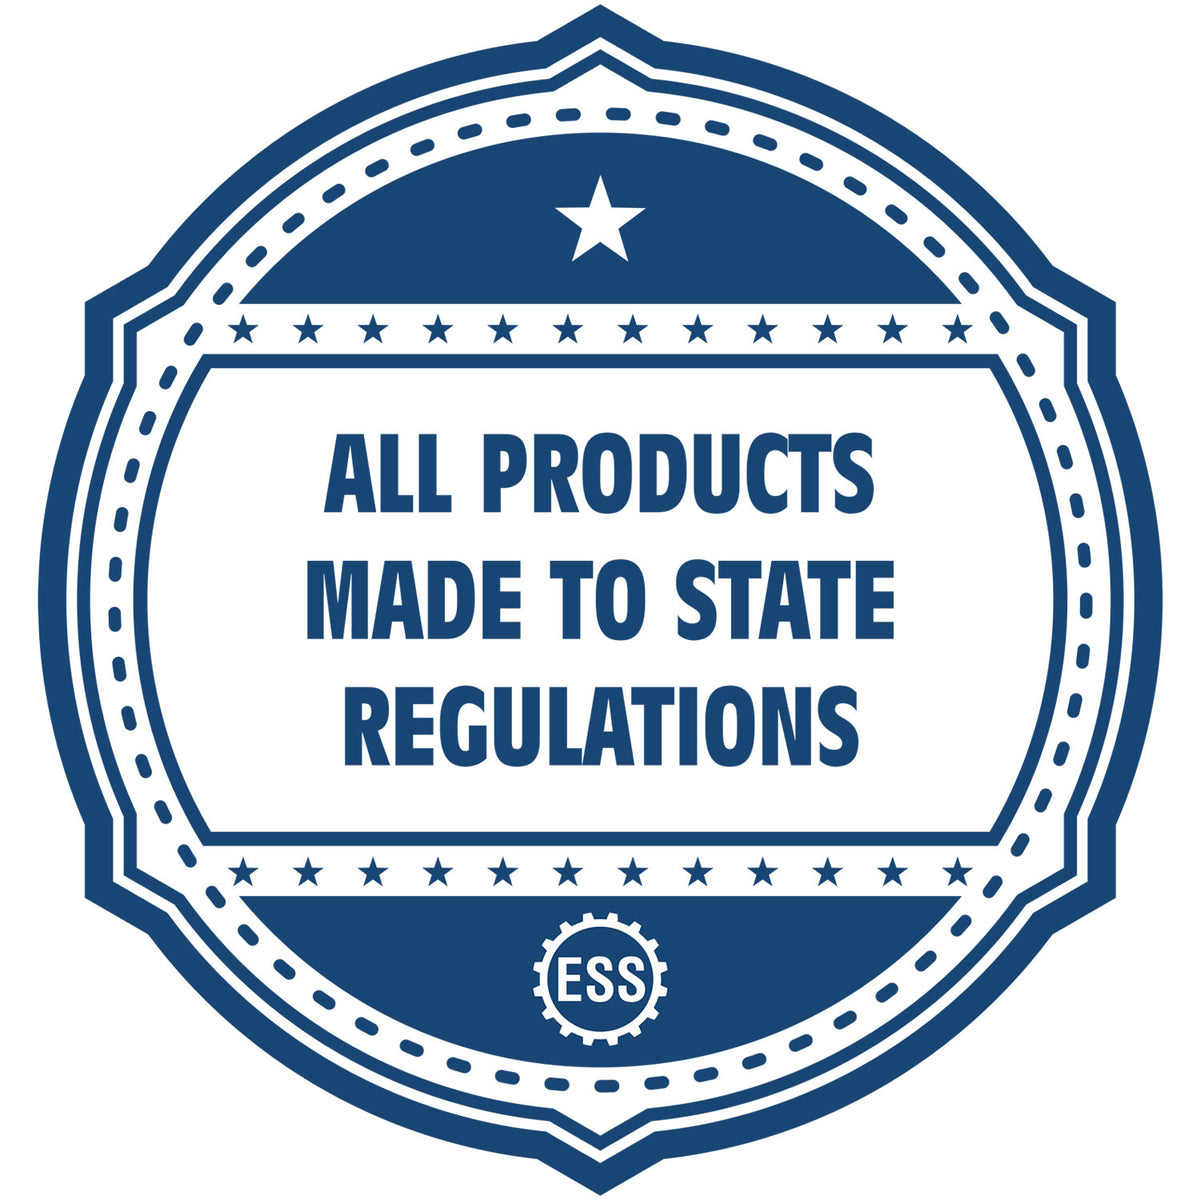 A blue icon or badge for the Hybrid Illinois Geologist Seal showing that this product is made in compliance with state regulations.